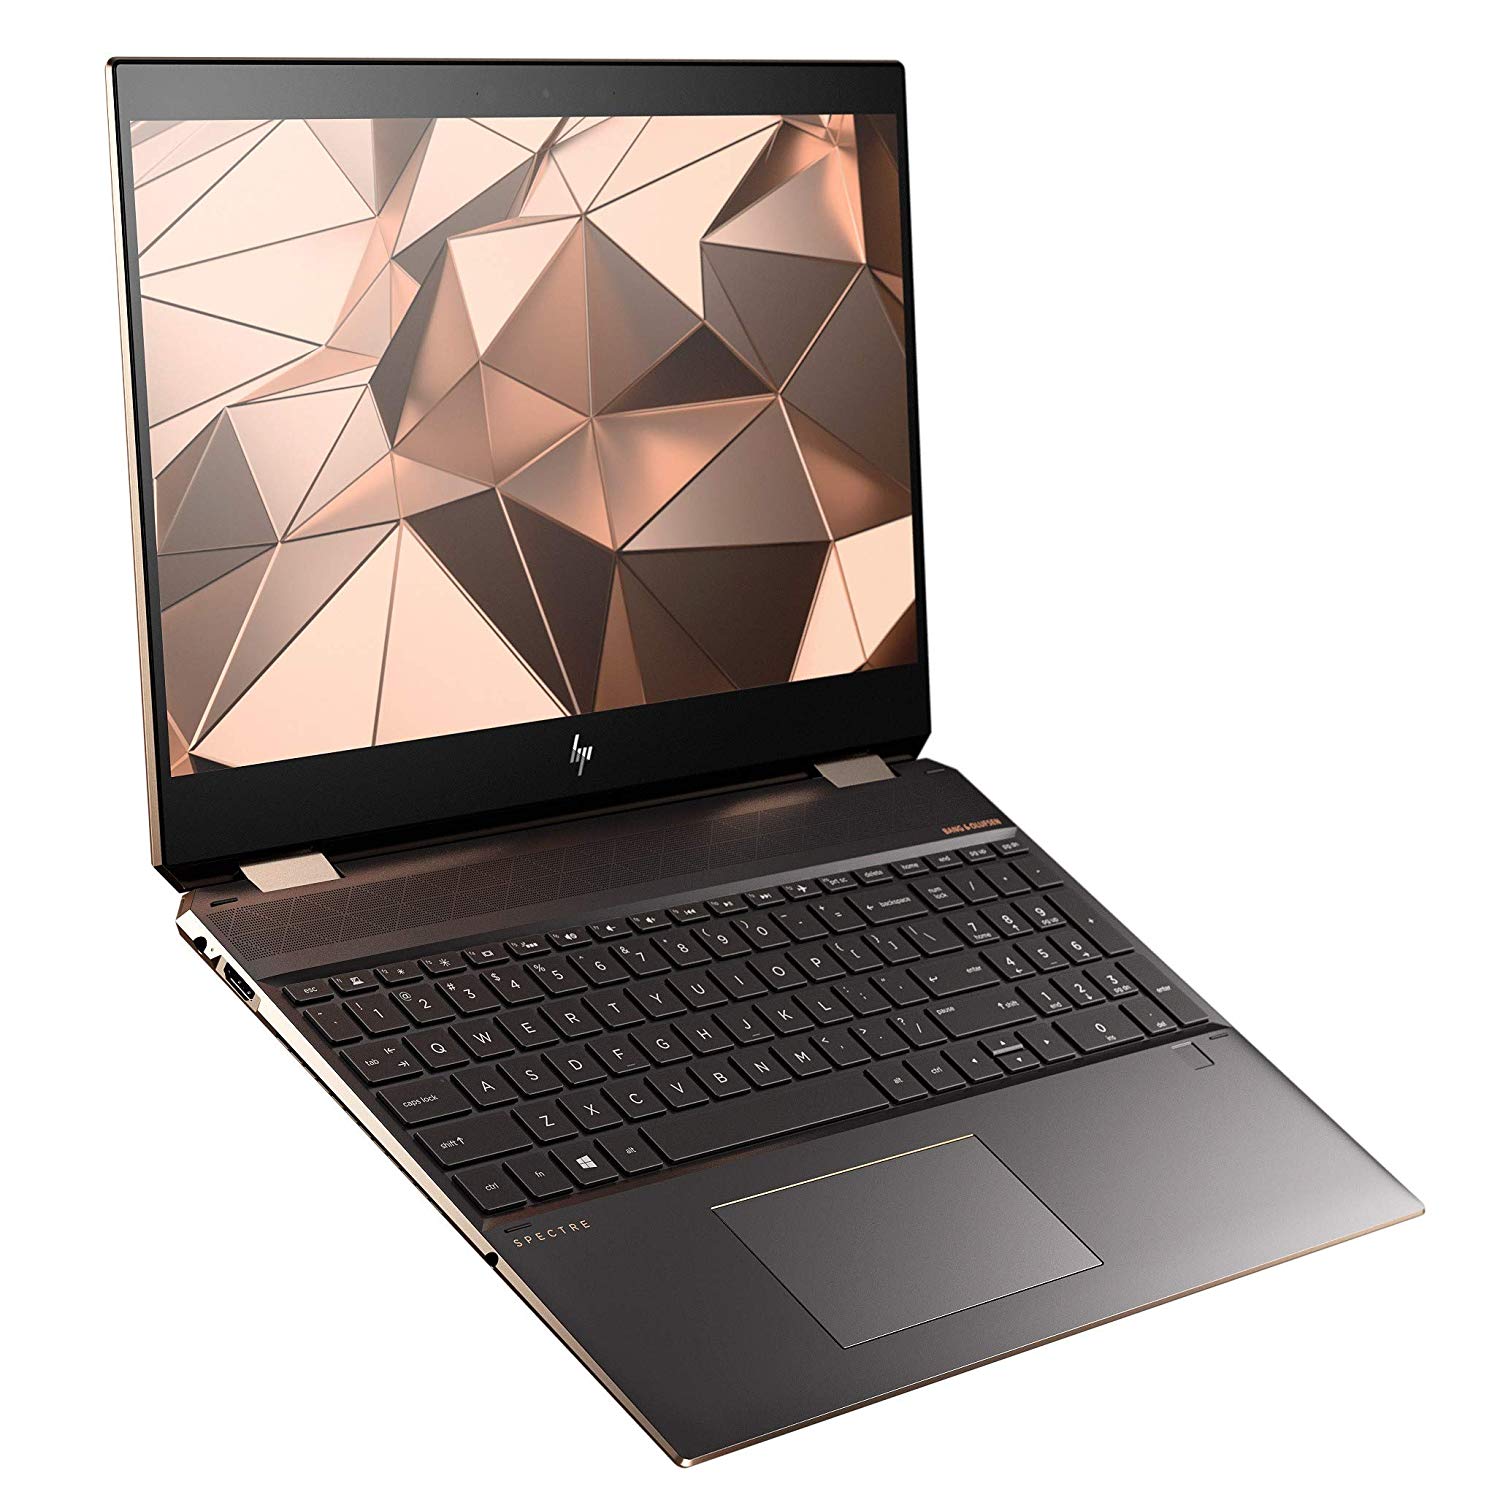 HP Spectre X360 15-df1004TX Launched in India